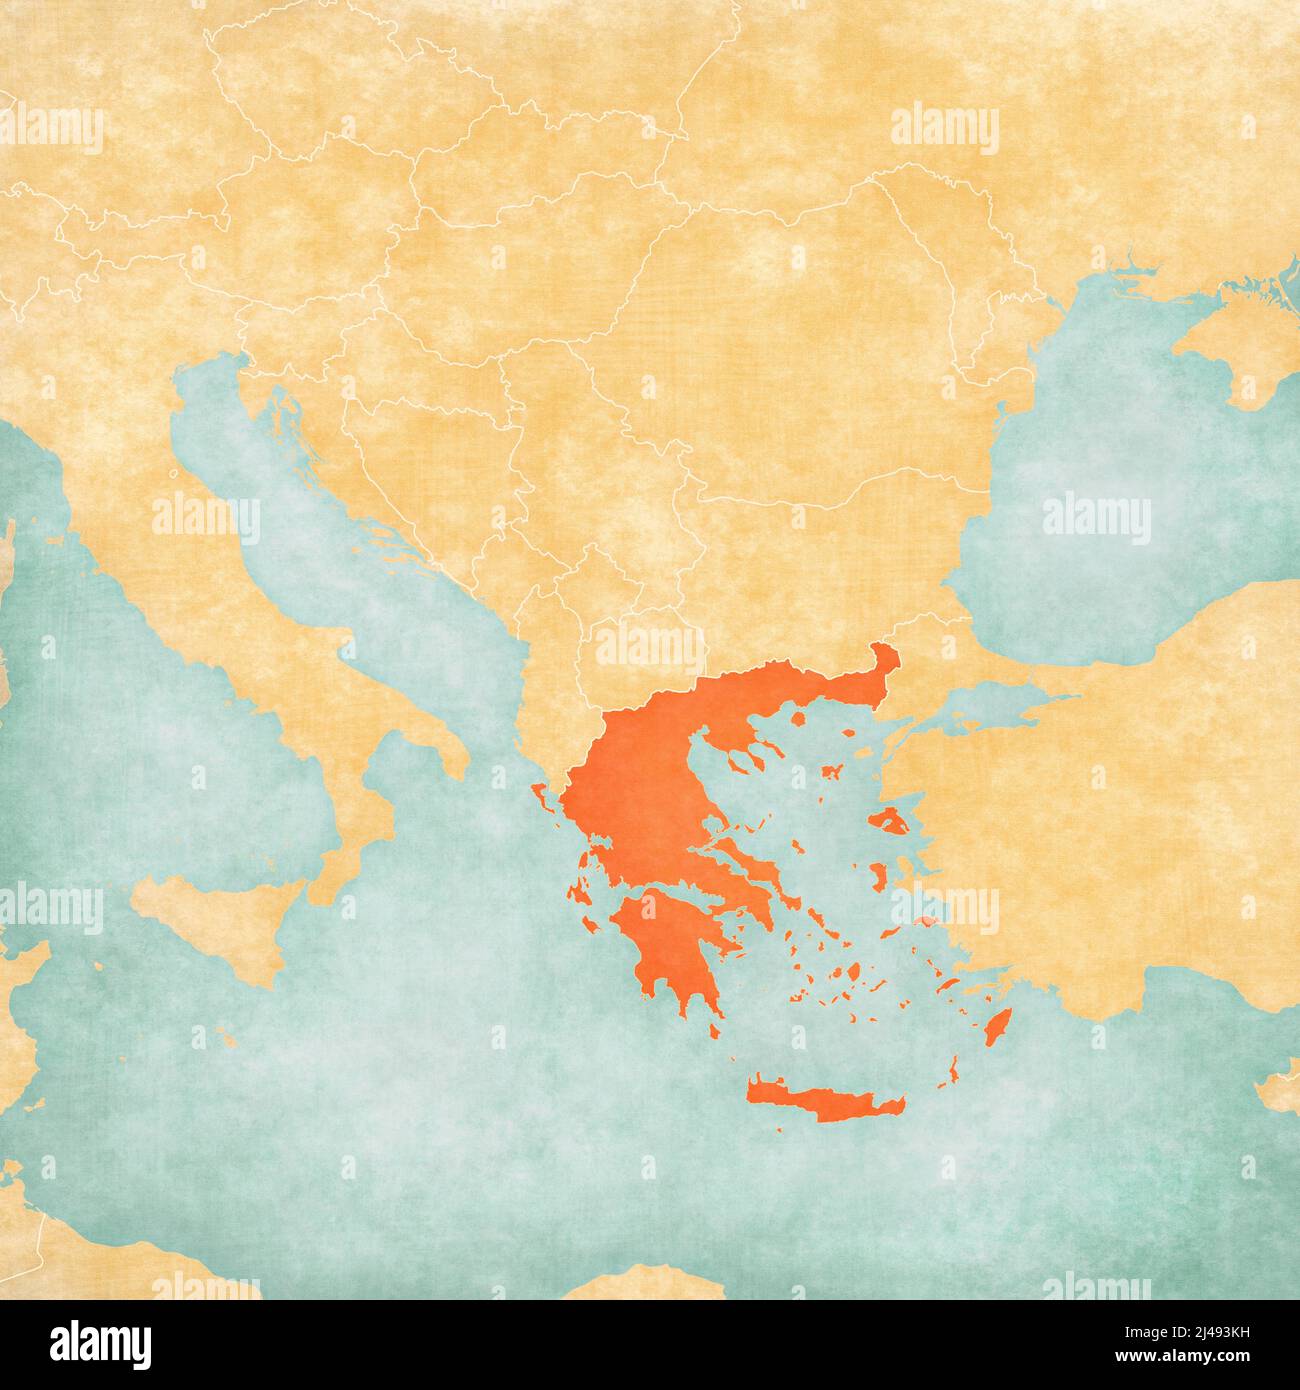 Greece on the map of Balkans in soft grunge and vintage style, like old paper with watercolor painting. Stock Photo